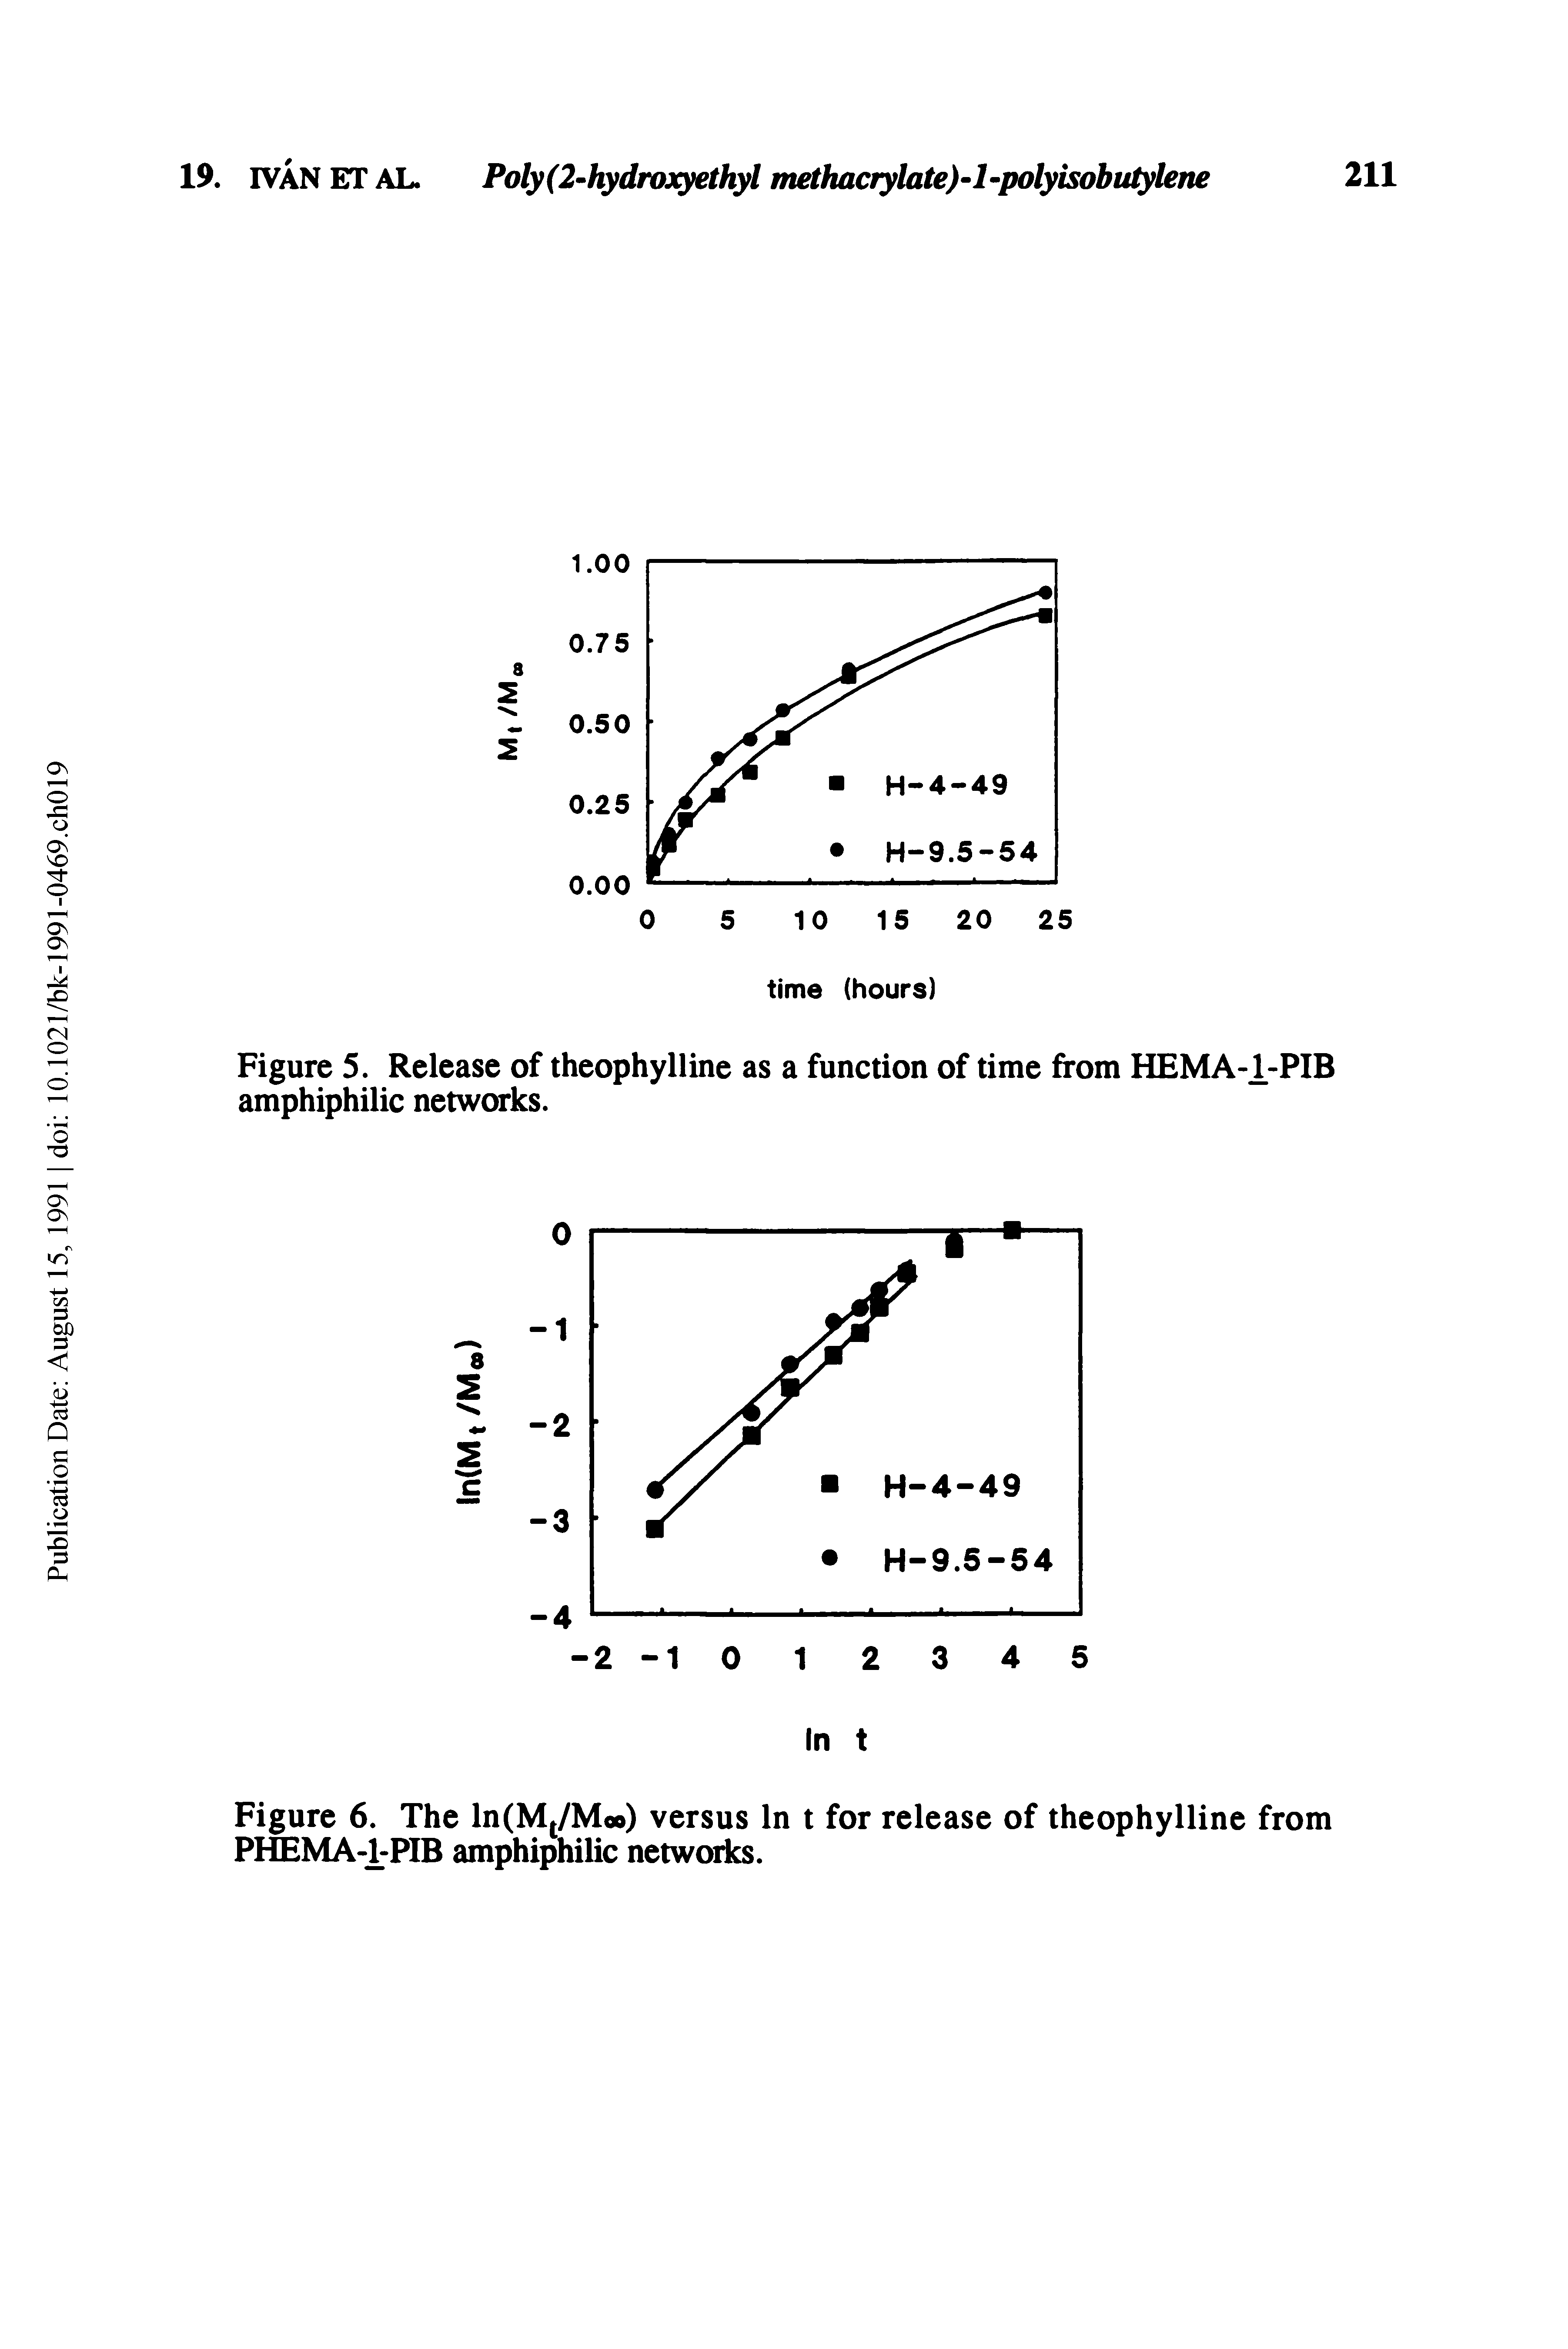 Figure 6. The ln(Mt/Mco) versus In t for release of theophylline from PHEMA-FPIB amphiphilic networks.